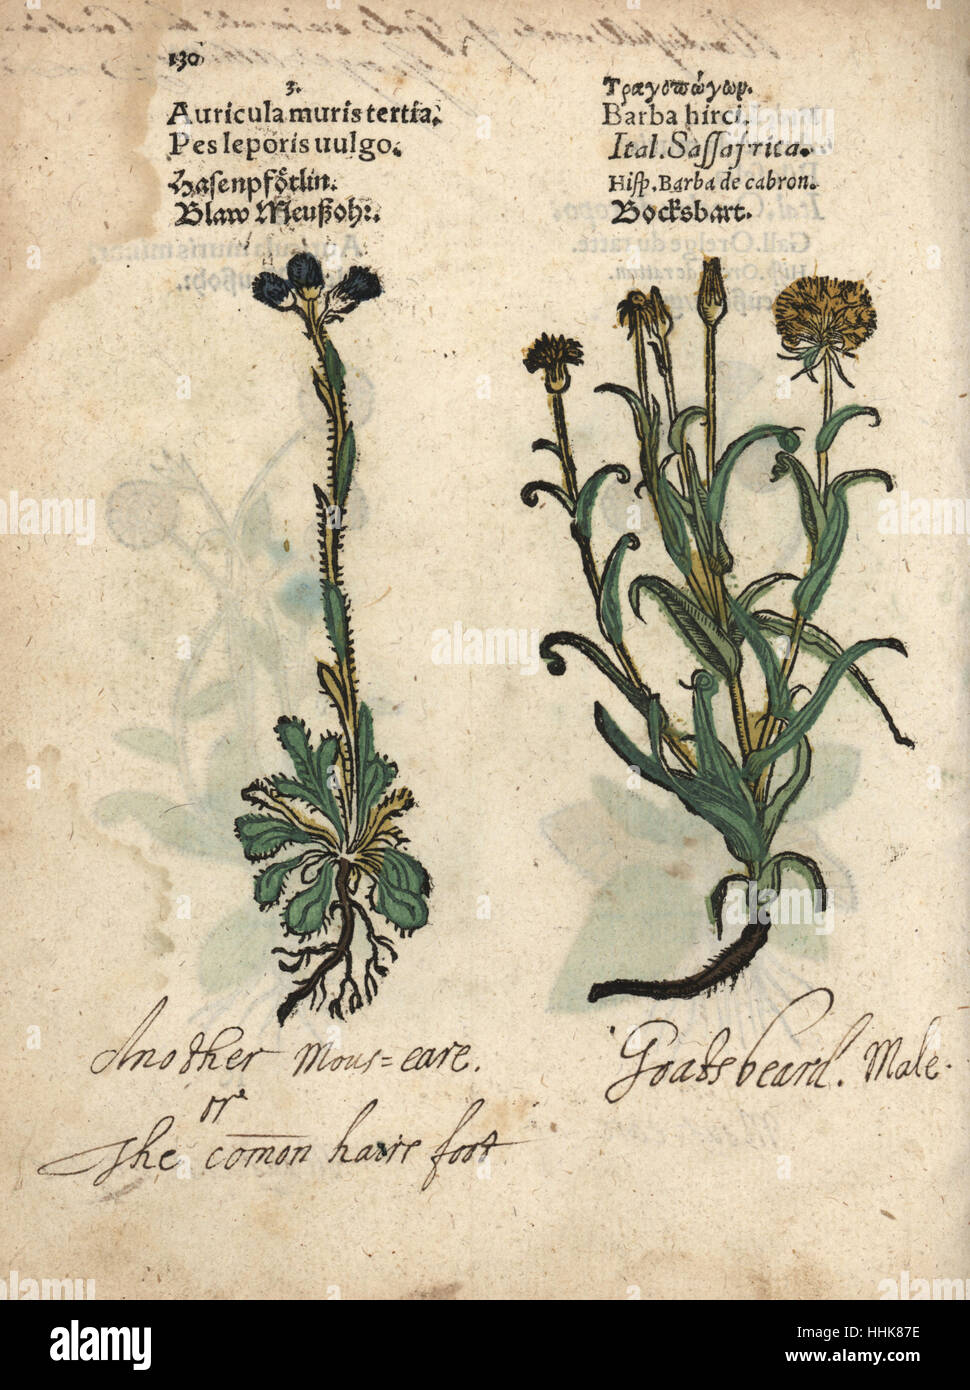 Mouse-ear hawkweed, Hieracium pilosella, and meadow salsify or goat's beard, Tragopogon pratensis. Handcoloured woodblock engraving of a botanical illustration from Adam Lonicer's Krauterbuch, or Herbal, Frankfurt, 1557. This from a 17th century pirate edition or atlas of illustrations only, with captions in Latin, Greek, French, Italian, German, and in English manuscript. Stock Photo